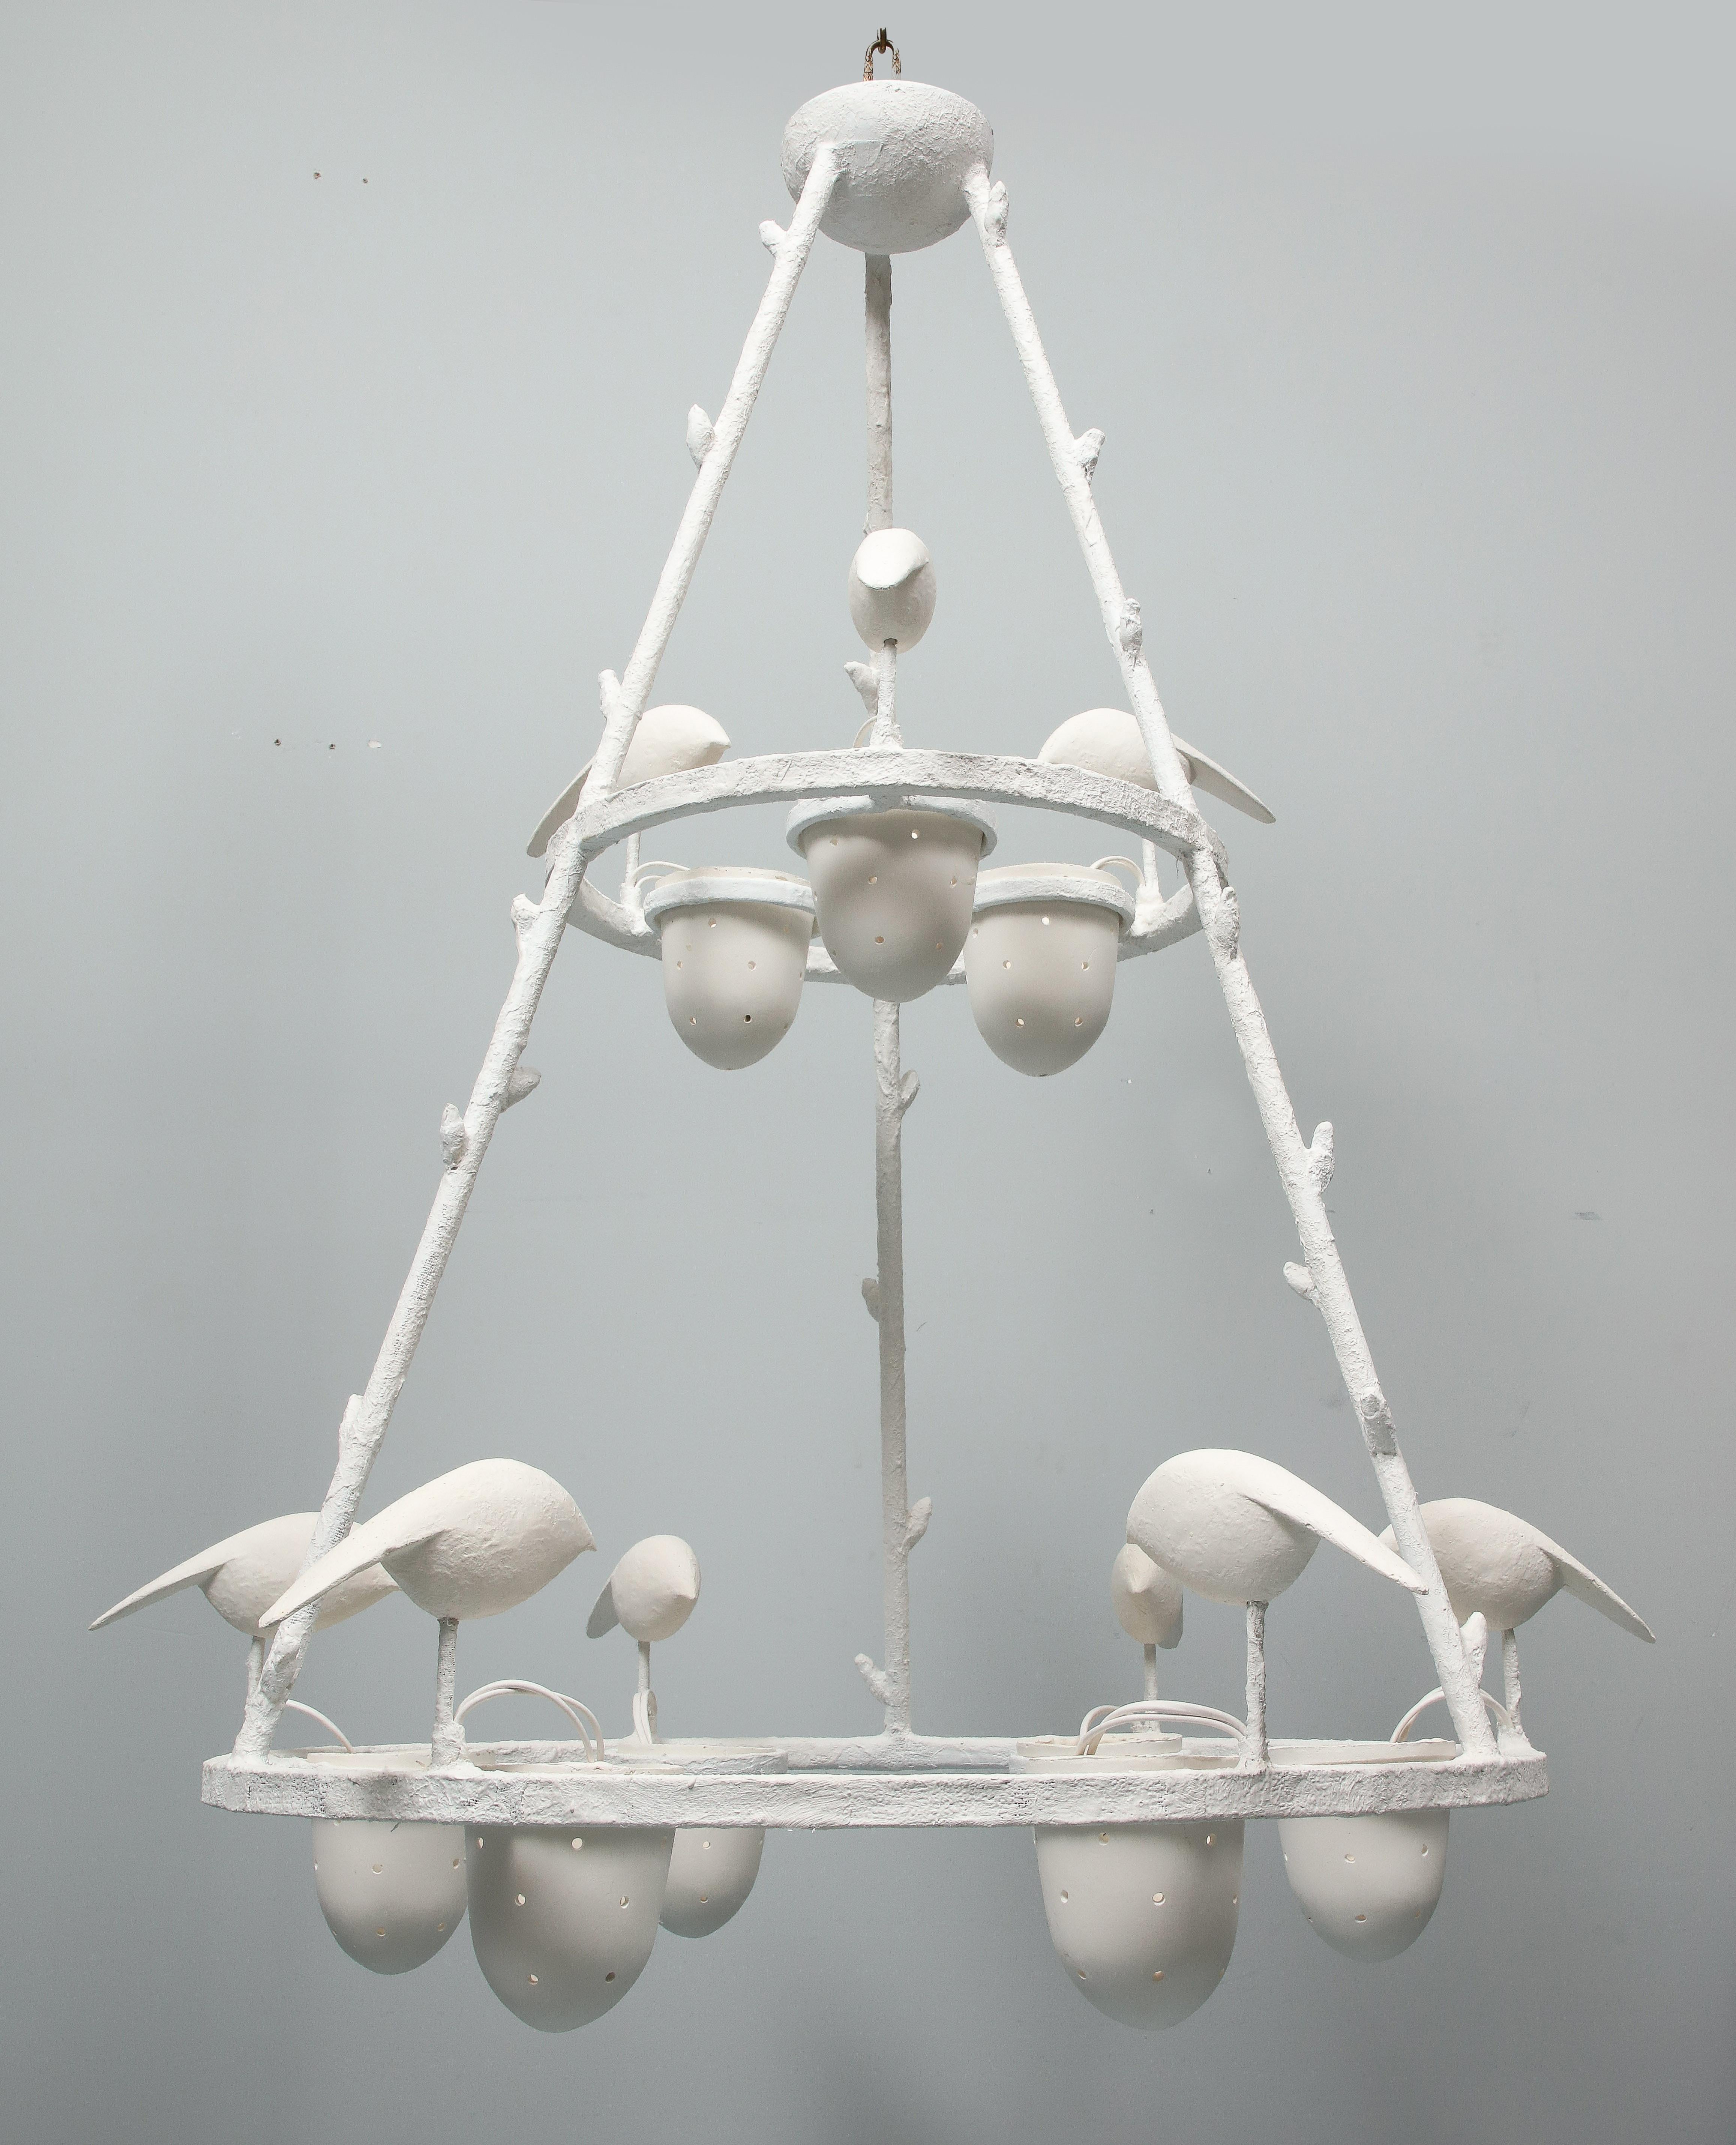 Impressive Tall White Plaster Chandelier by Jacques Darbaud In Excellent Condition For Sale In Jersey City, NJ